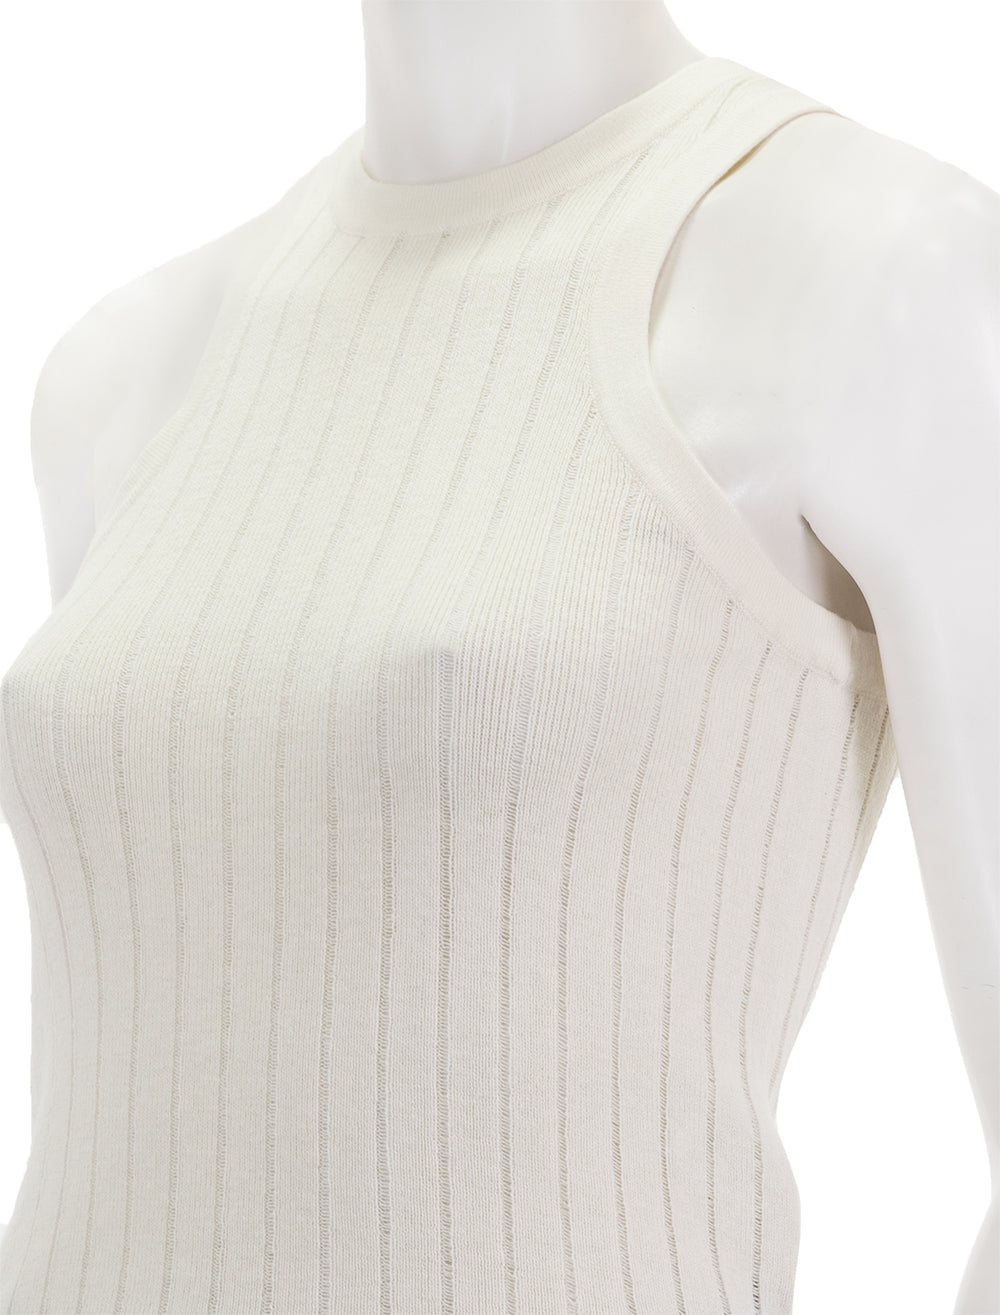 Close-up view of Anine Bing's noel top in ivory.